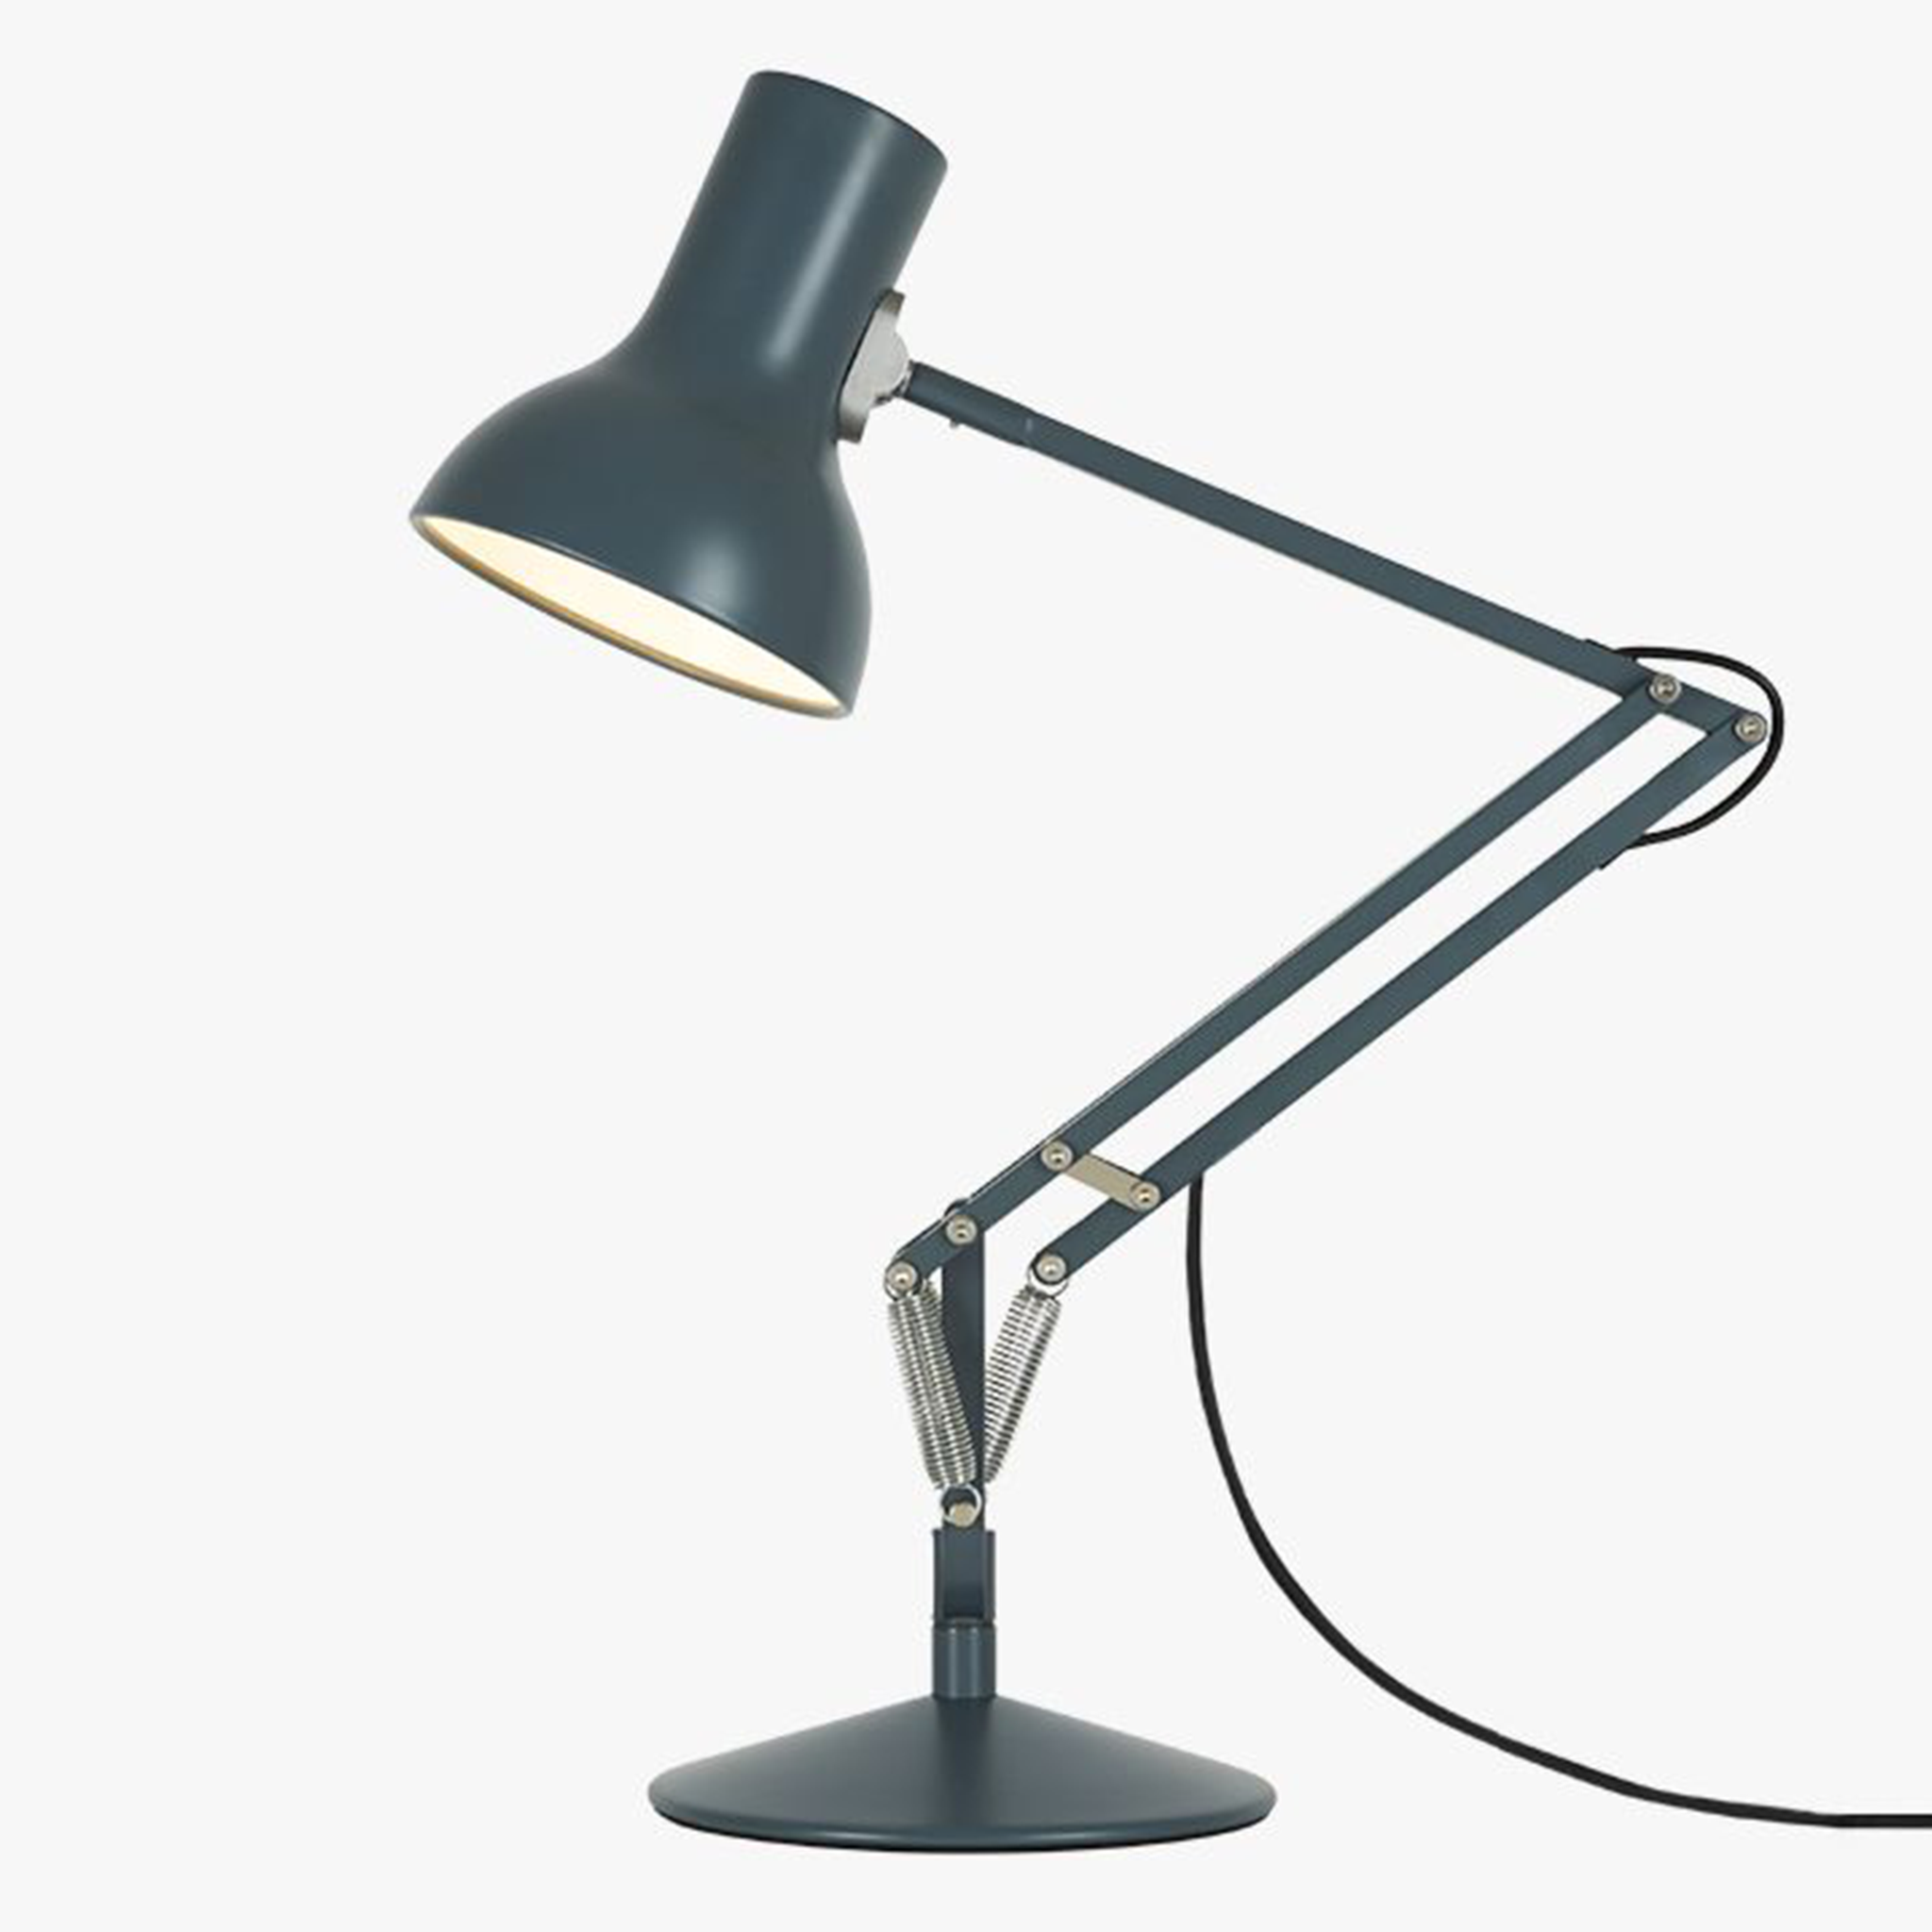 Type 75 Mini Desk Lamp by Anglepoise